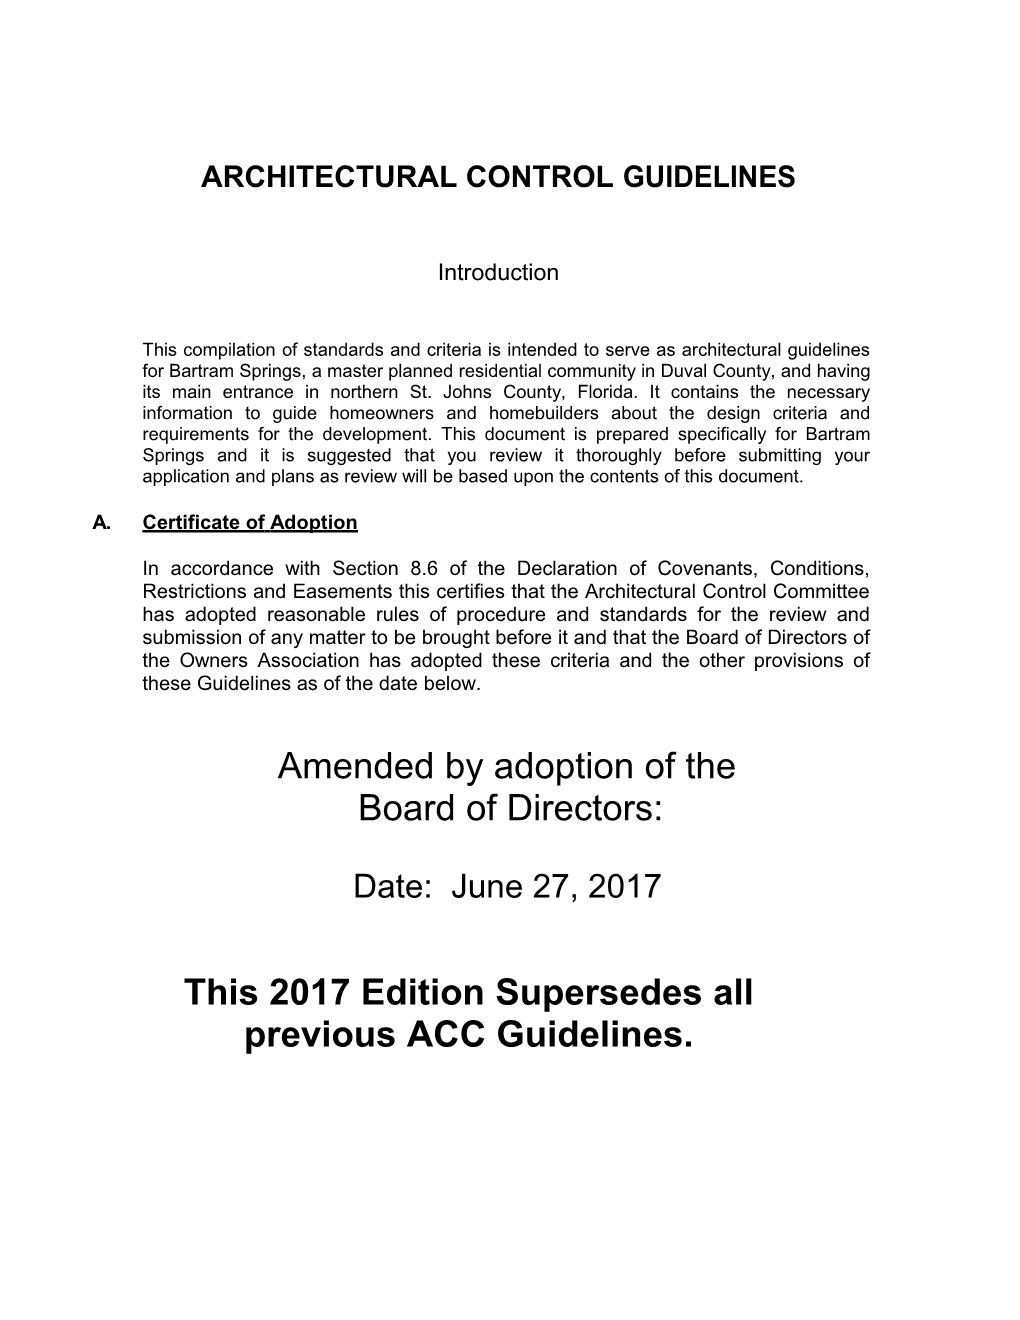 BART - ACC 2016 Guidelines Approved 082316